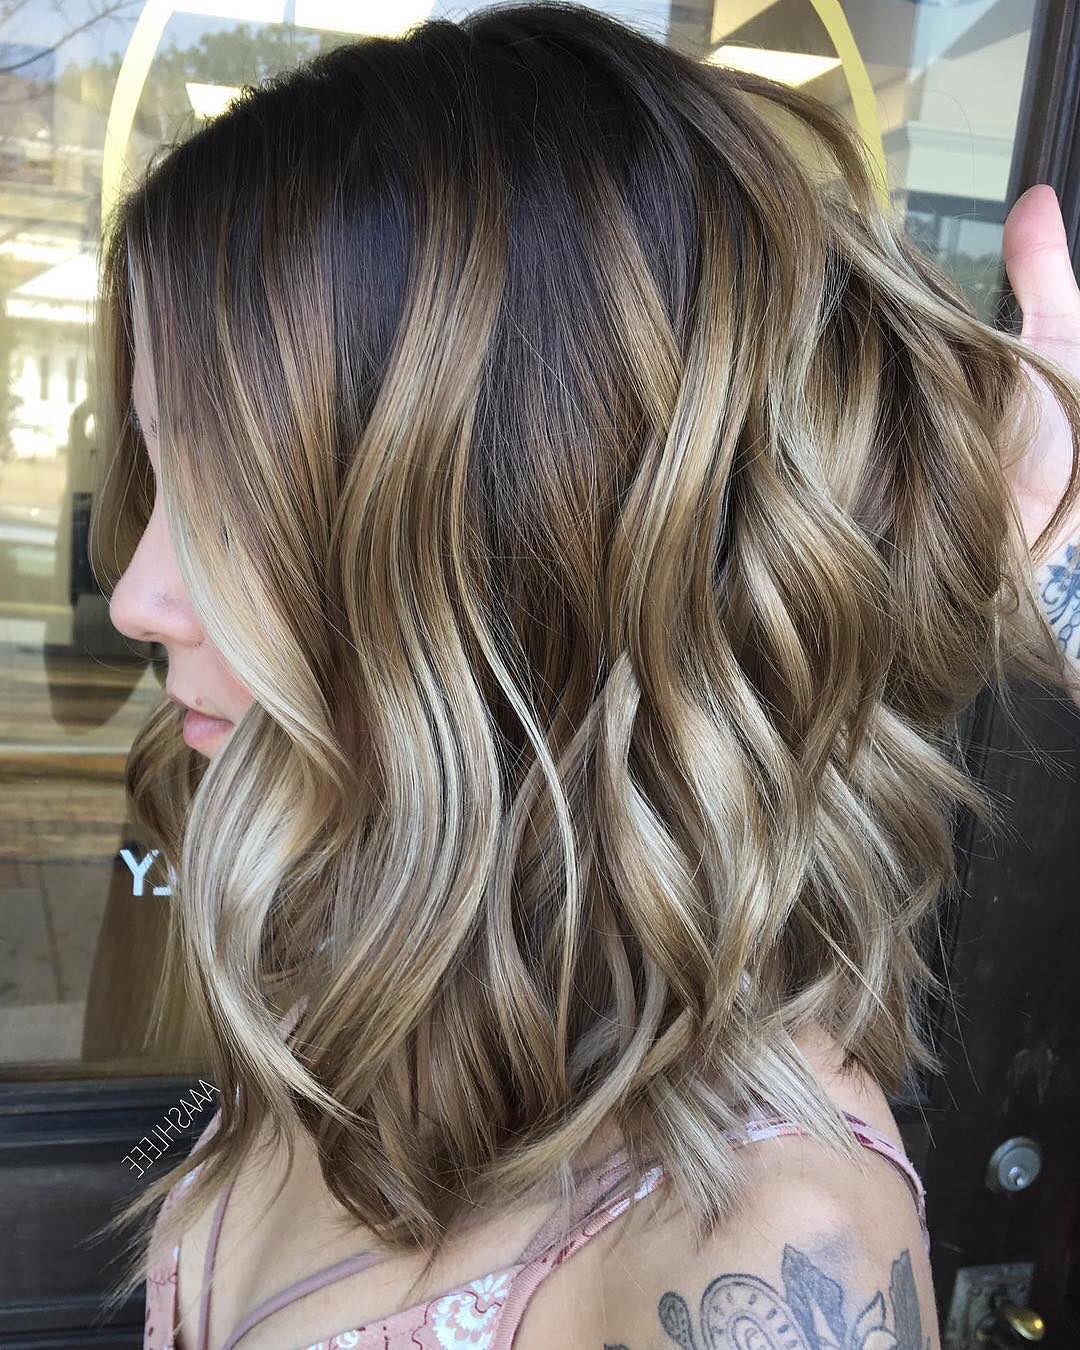 10 Ombre Balayage Hairstyles For Medium Length Hair Hair Color 2018